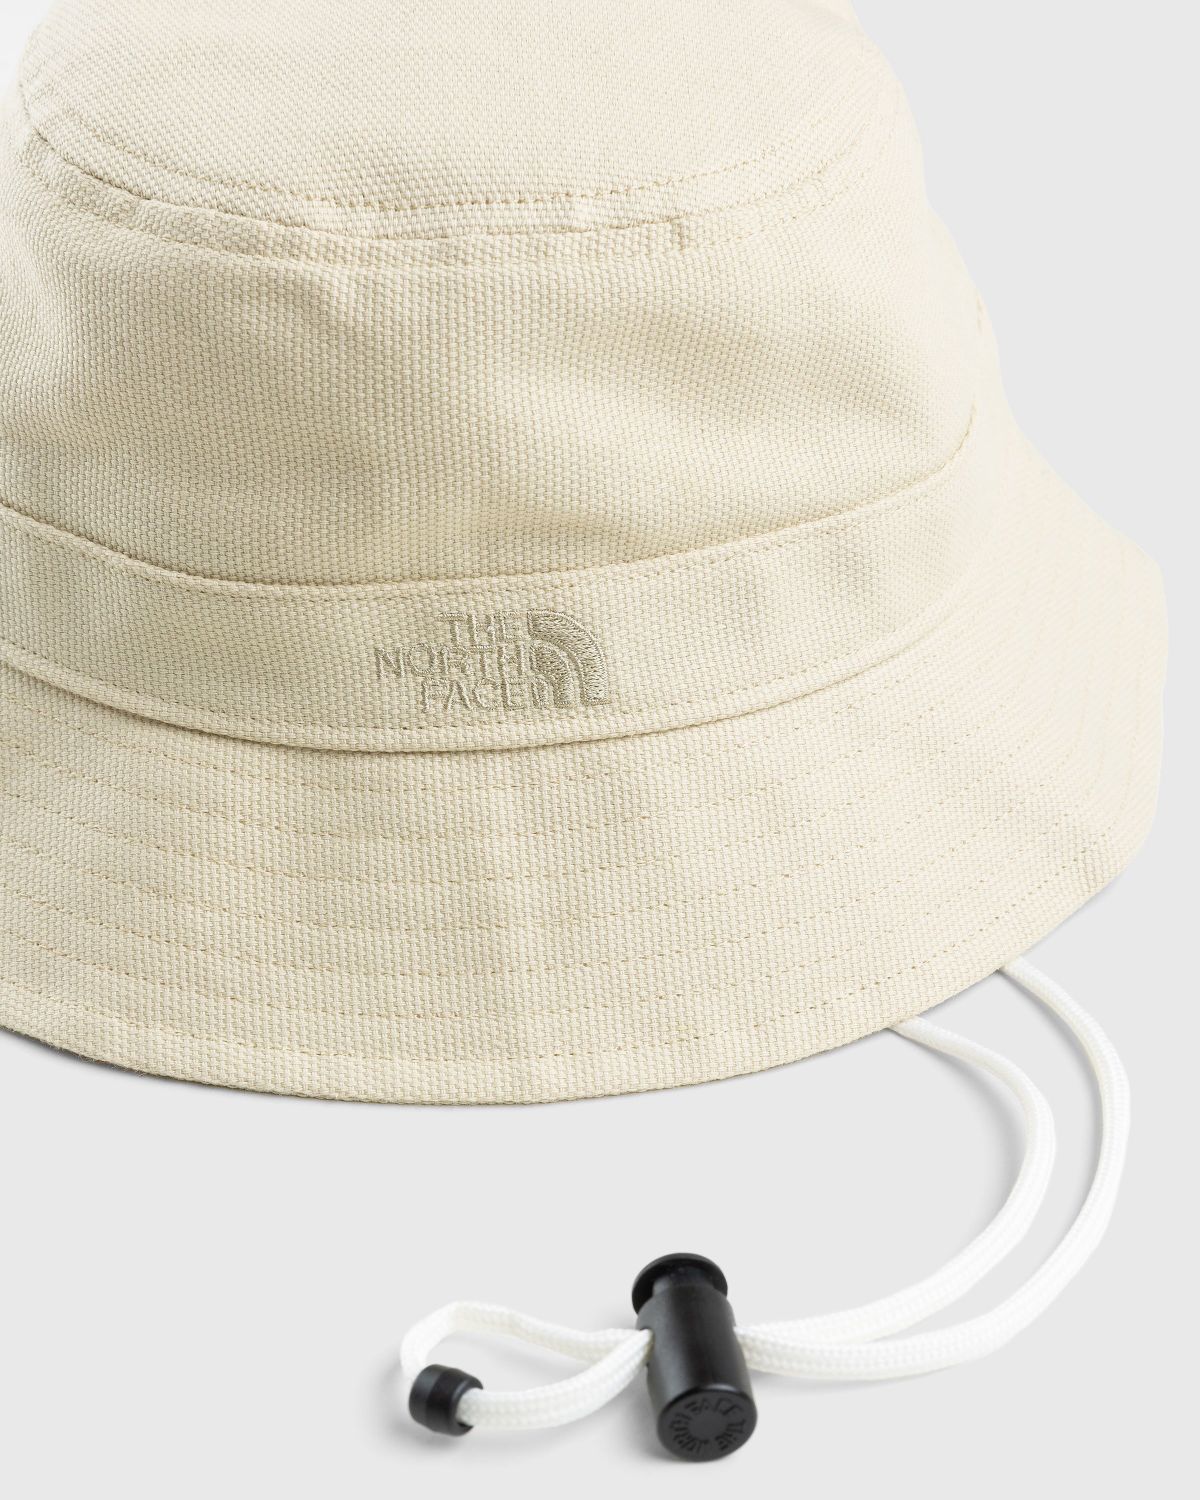 The North Face – Mountain Bucket Hat Gravel - Hats - Colorway - Image 3